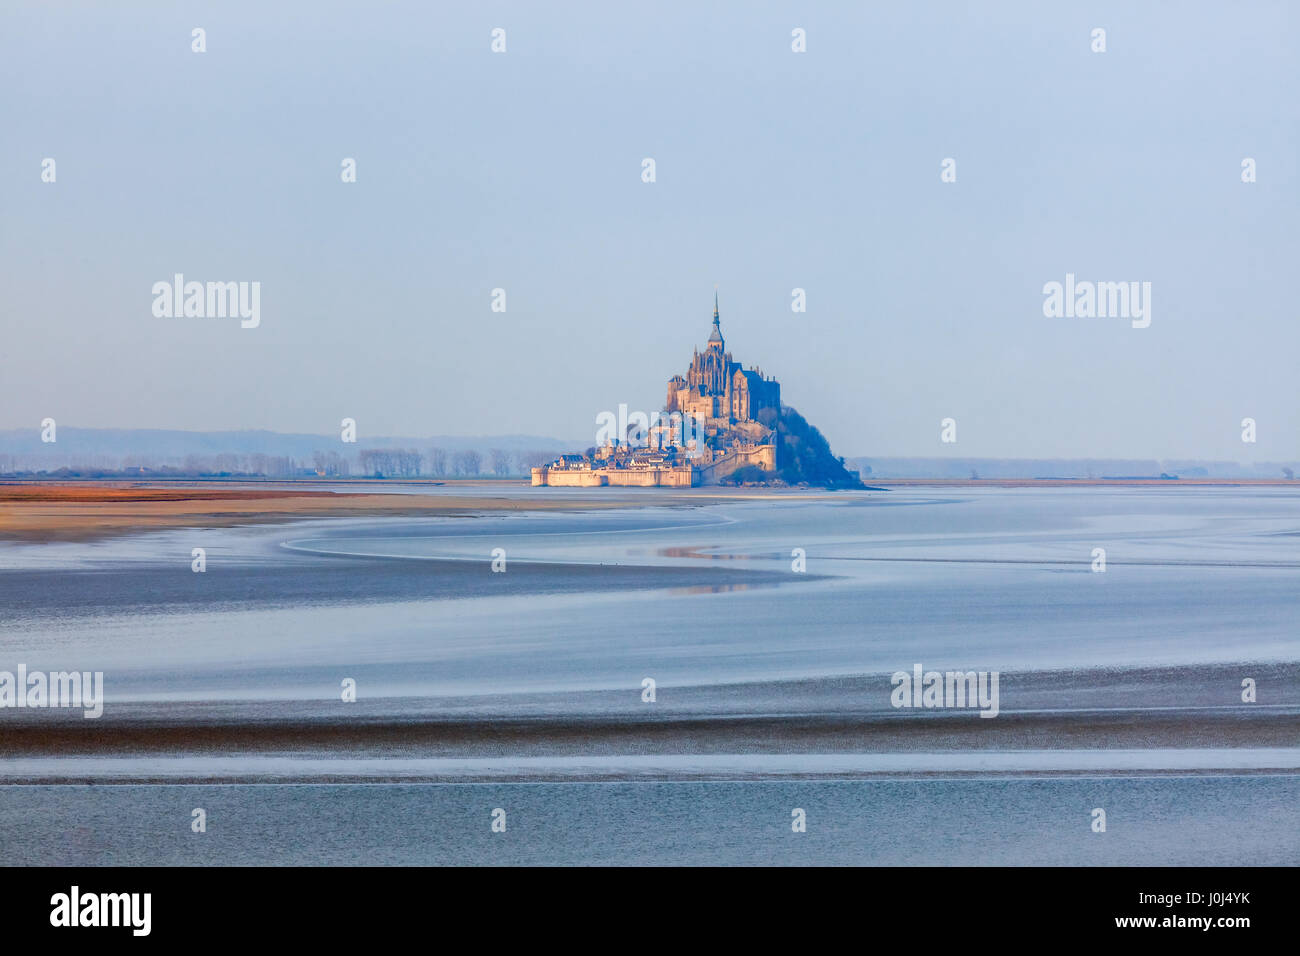 Panoramic view of famous Le Mont Saint-Michel tidal island and Saint-Michel Abbey in Normandy, in the department of Manche, France. Stock Photo